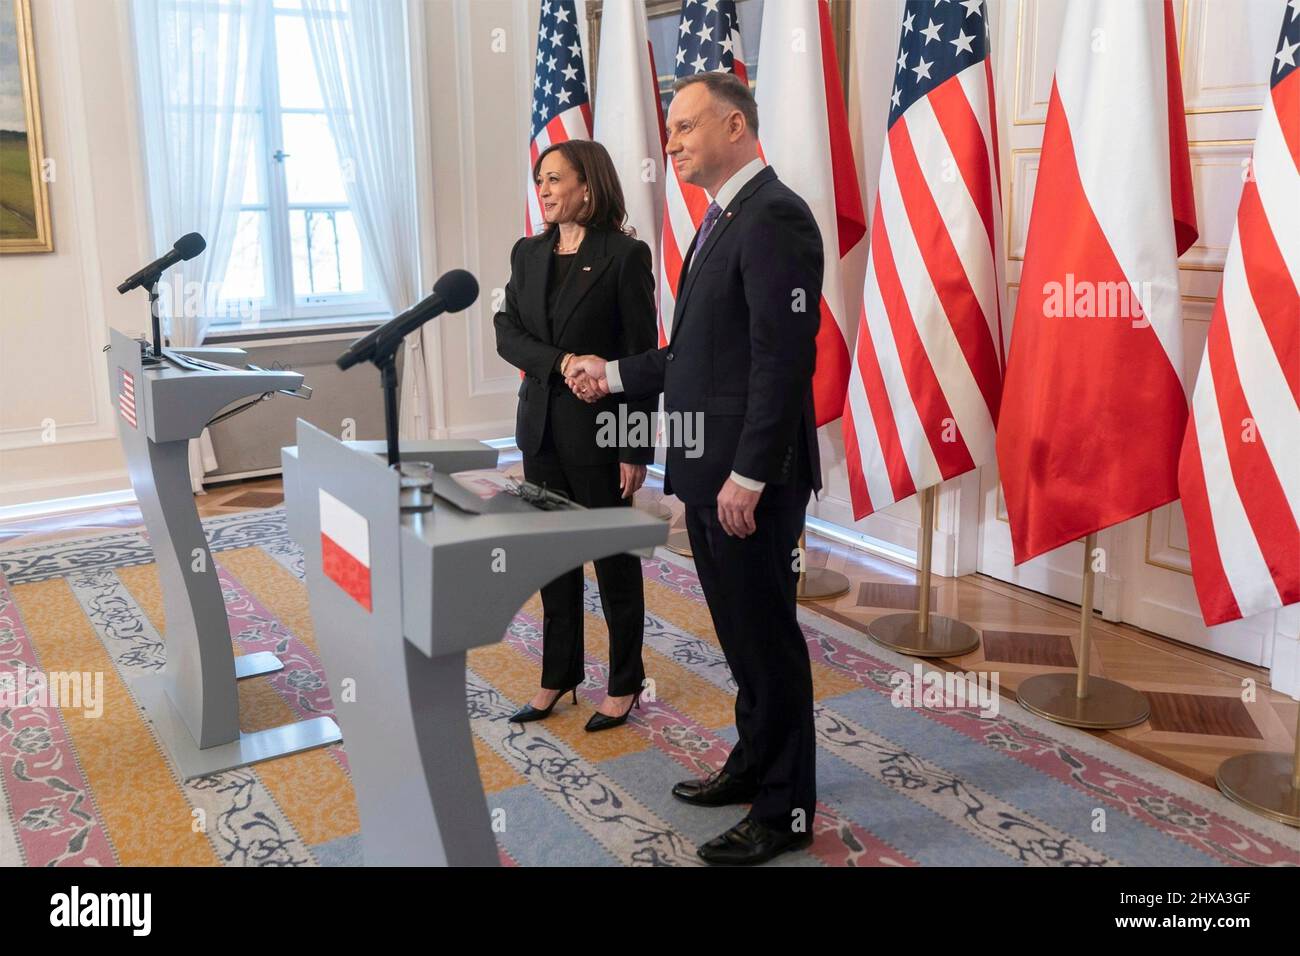 Warsaw, Poland. 10th Mar, 2022. U.S Vice President Kamala Harris, shakes hands with Polish President Andrzej Duda, right, before a joint press conference at Belwelder Palace, March 10, 2022 in Warsaw, Poland. Harris is in Poland to discuss the Ukraine crisis with NATO allies. Credit: Lawrence Jackson/White House Photo/Alamy Live News Stock Photo